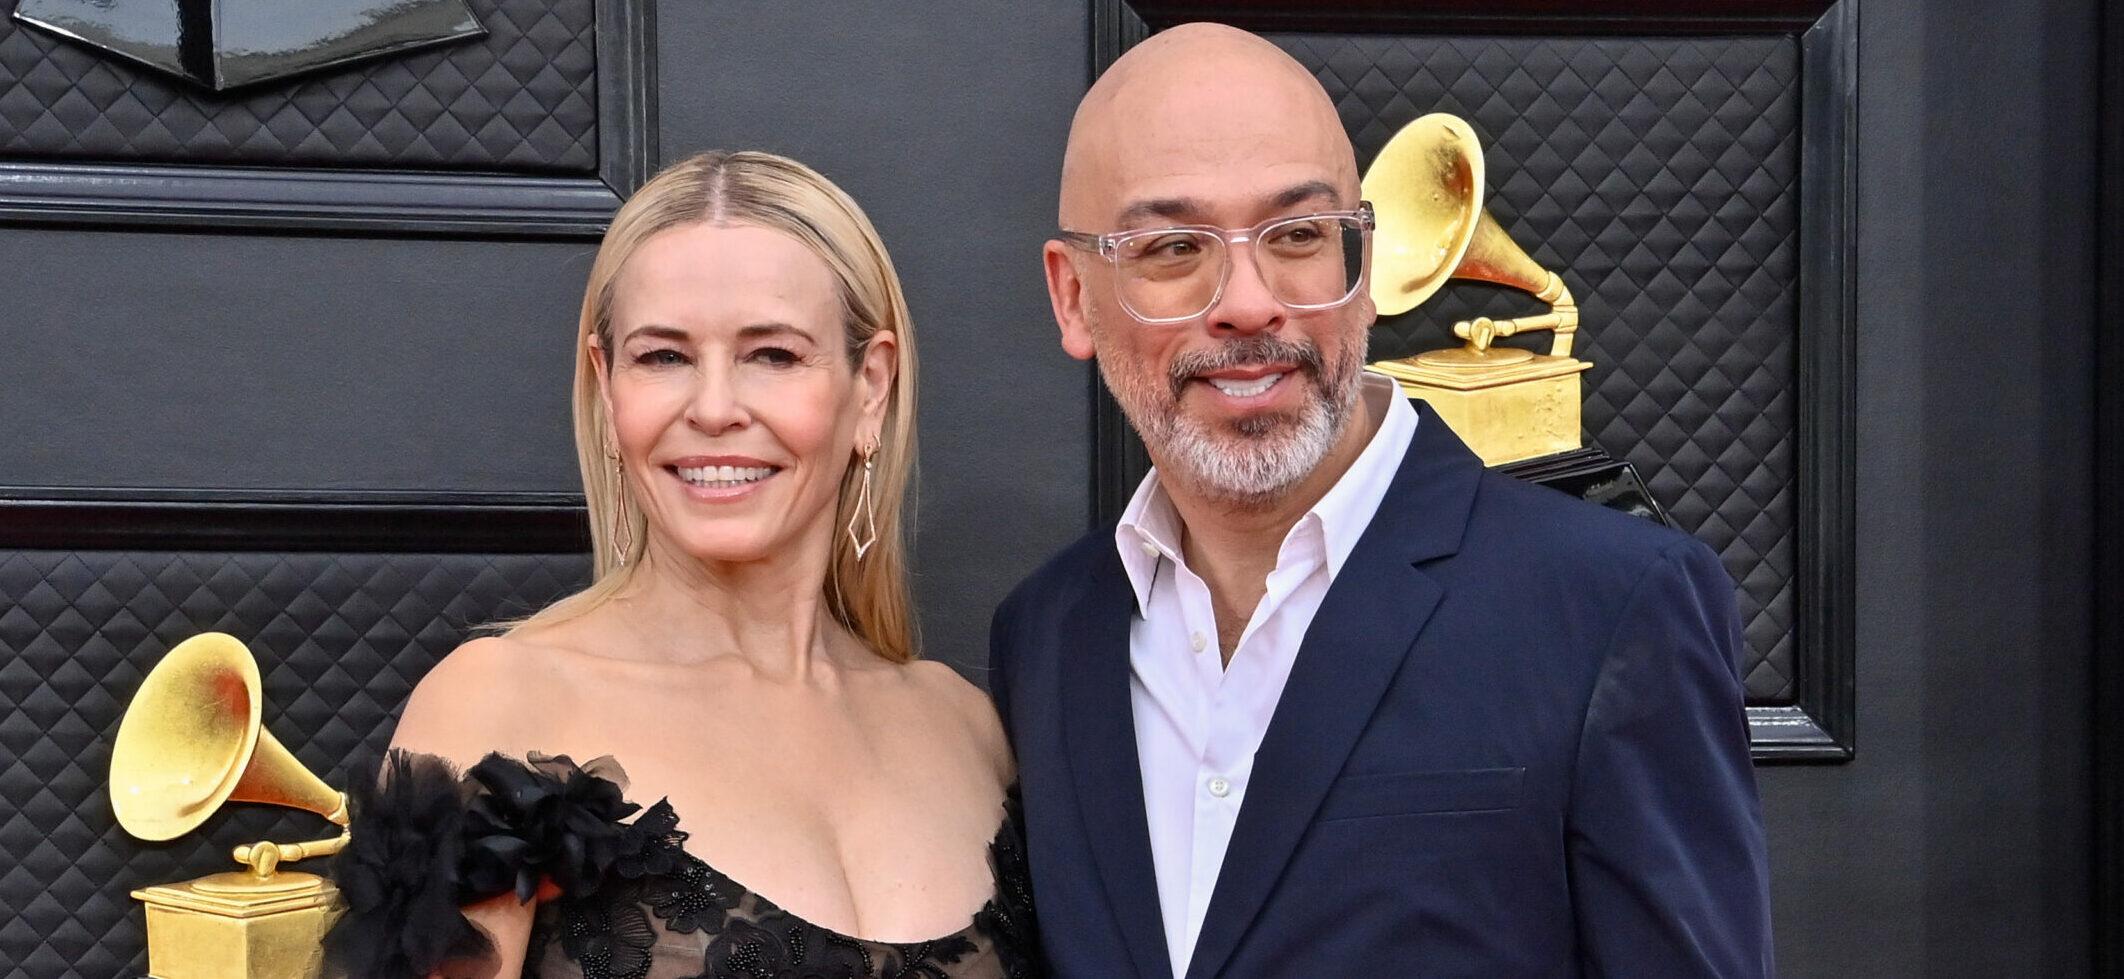 Jo Koy Says His Breakup With Chelsea Handler ‘Was Beautiful,’ Confirms He’s Still ‘Single’